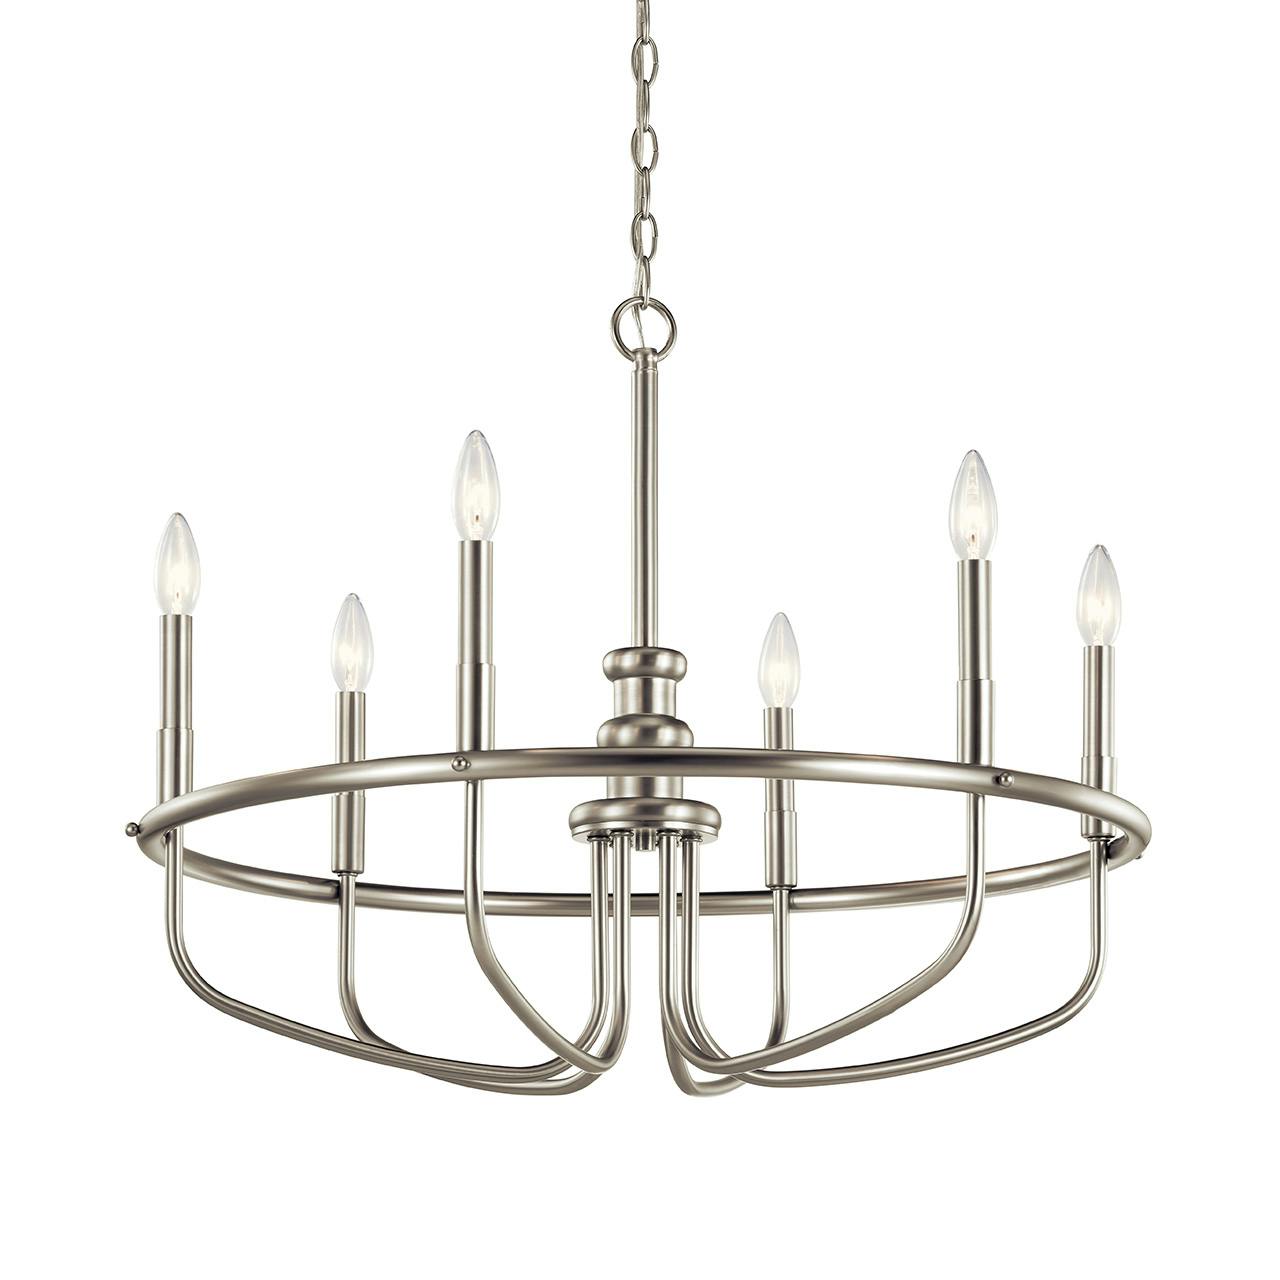 Capitol Hill 22" Chandelier Nickel without the canopy on a white background